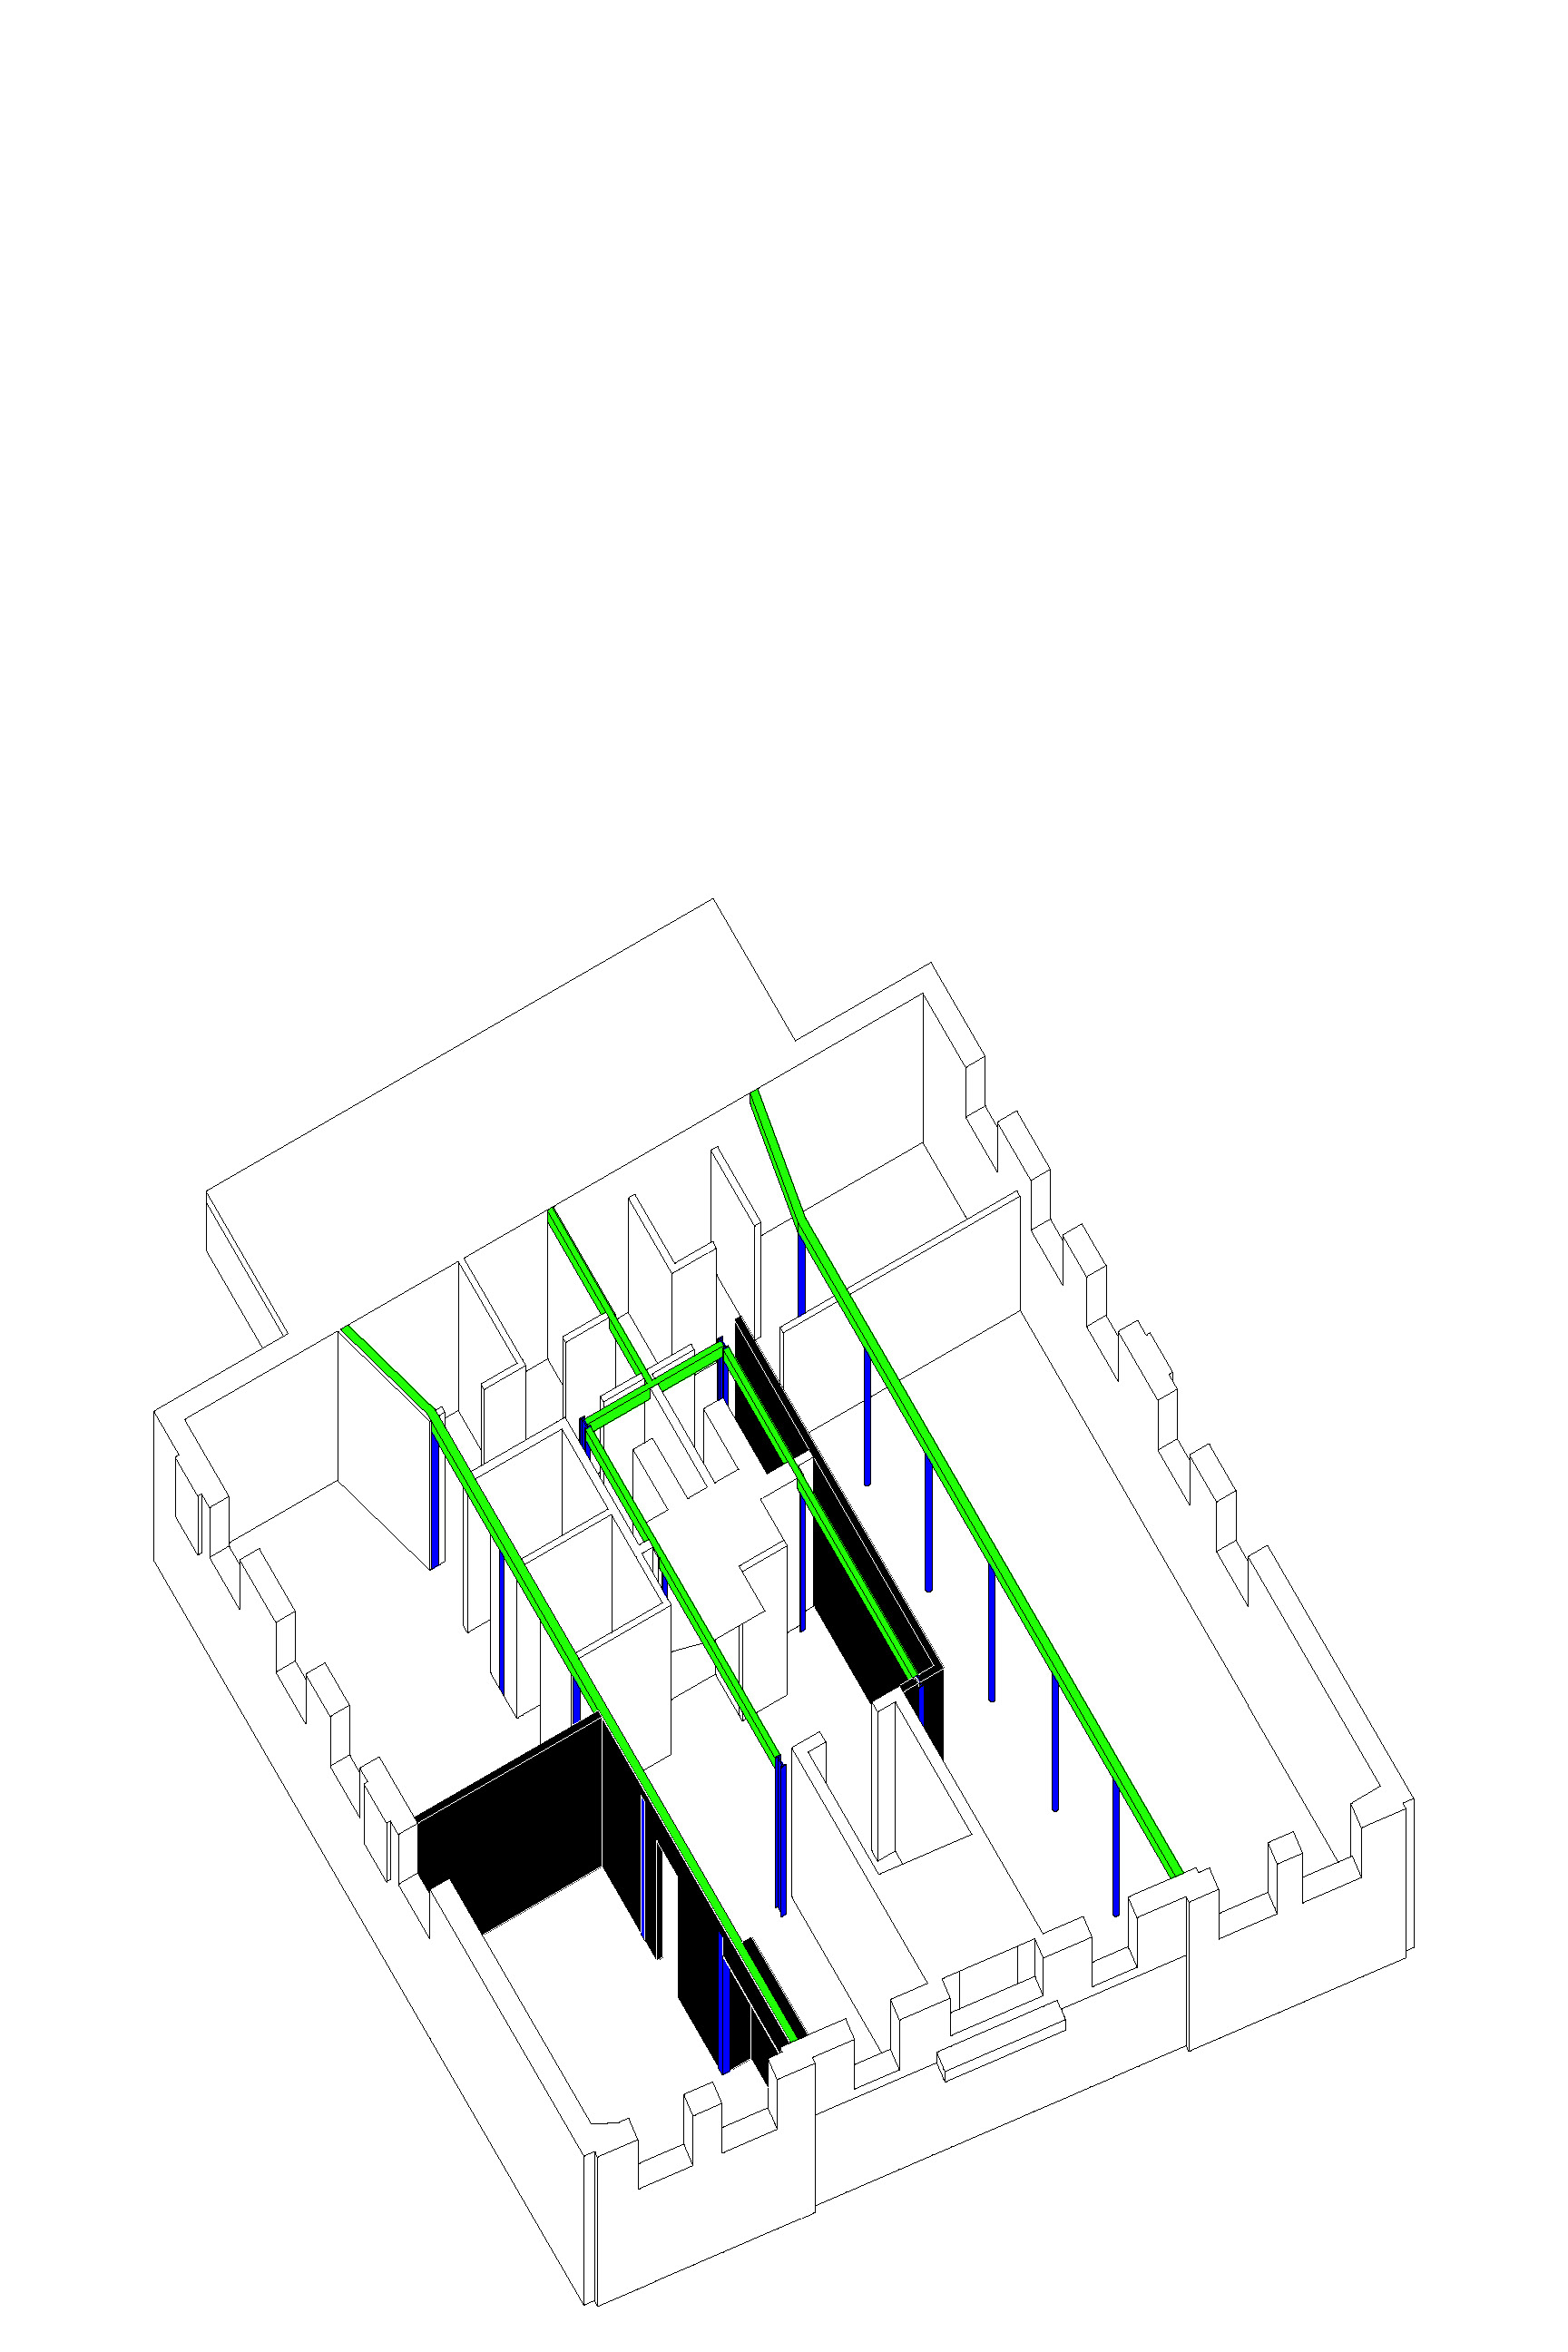 axonometric diagram of existing rooms and walls